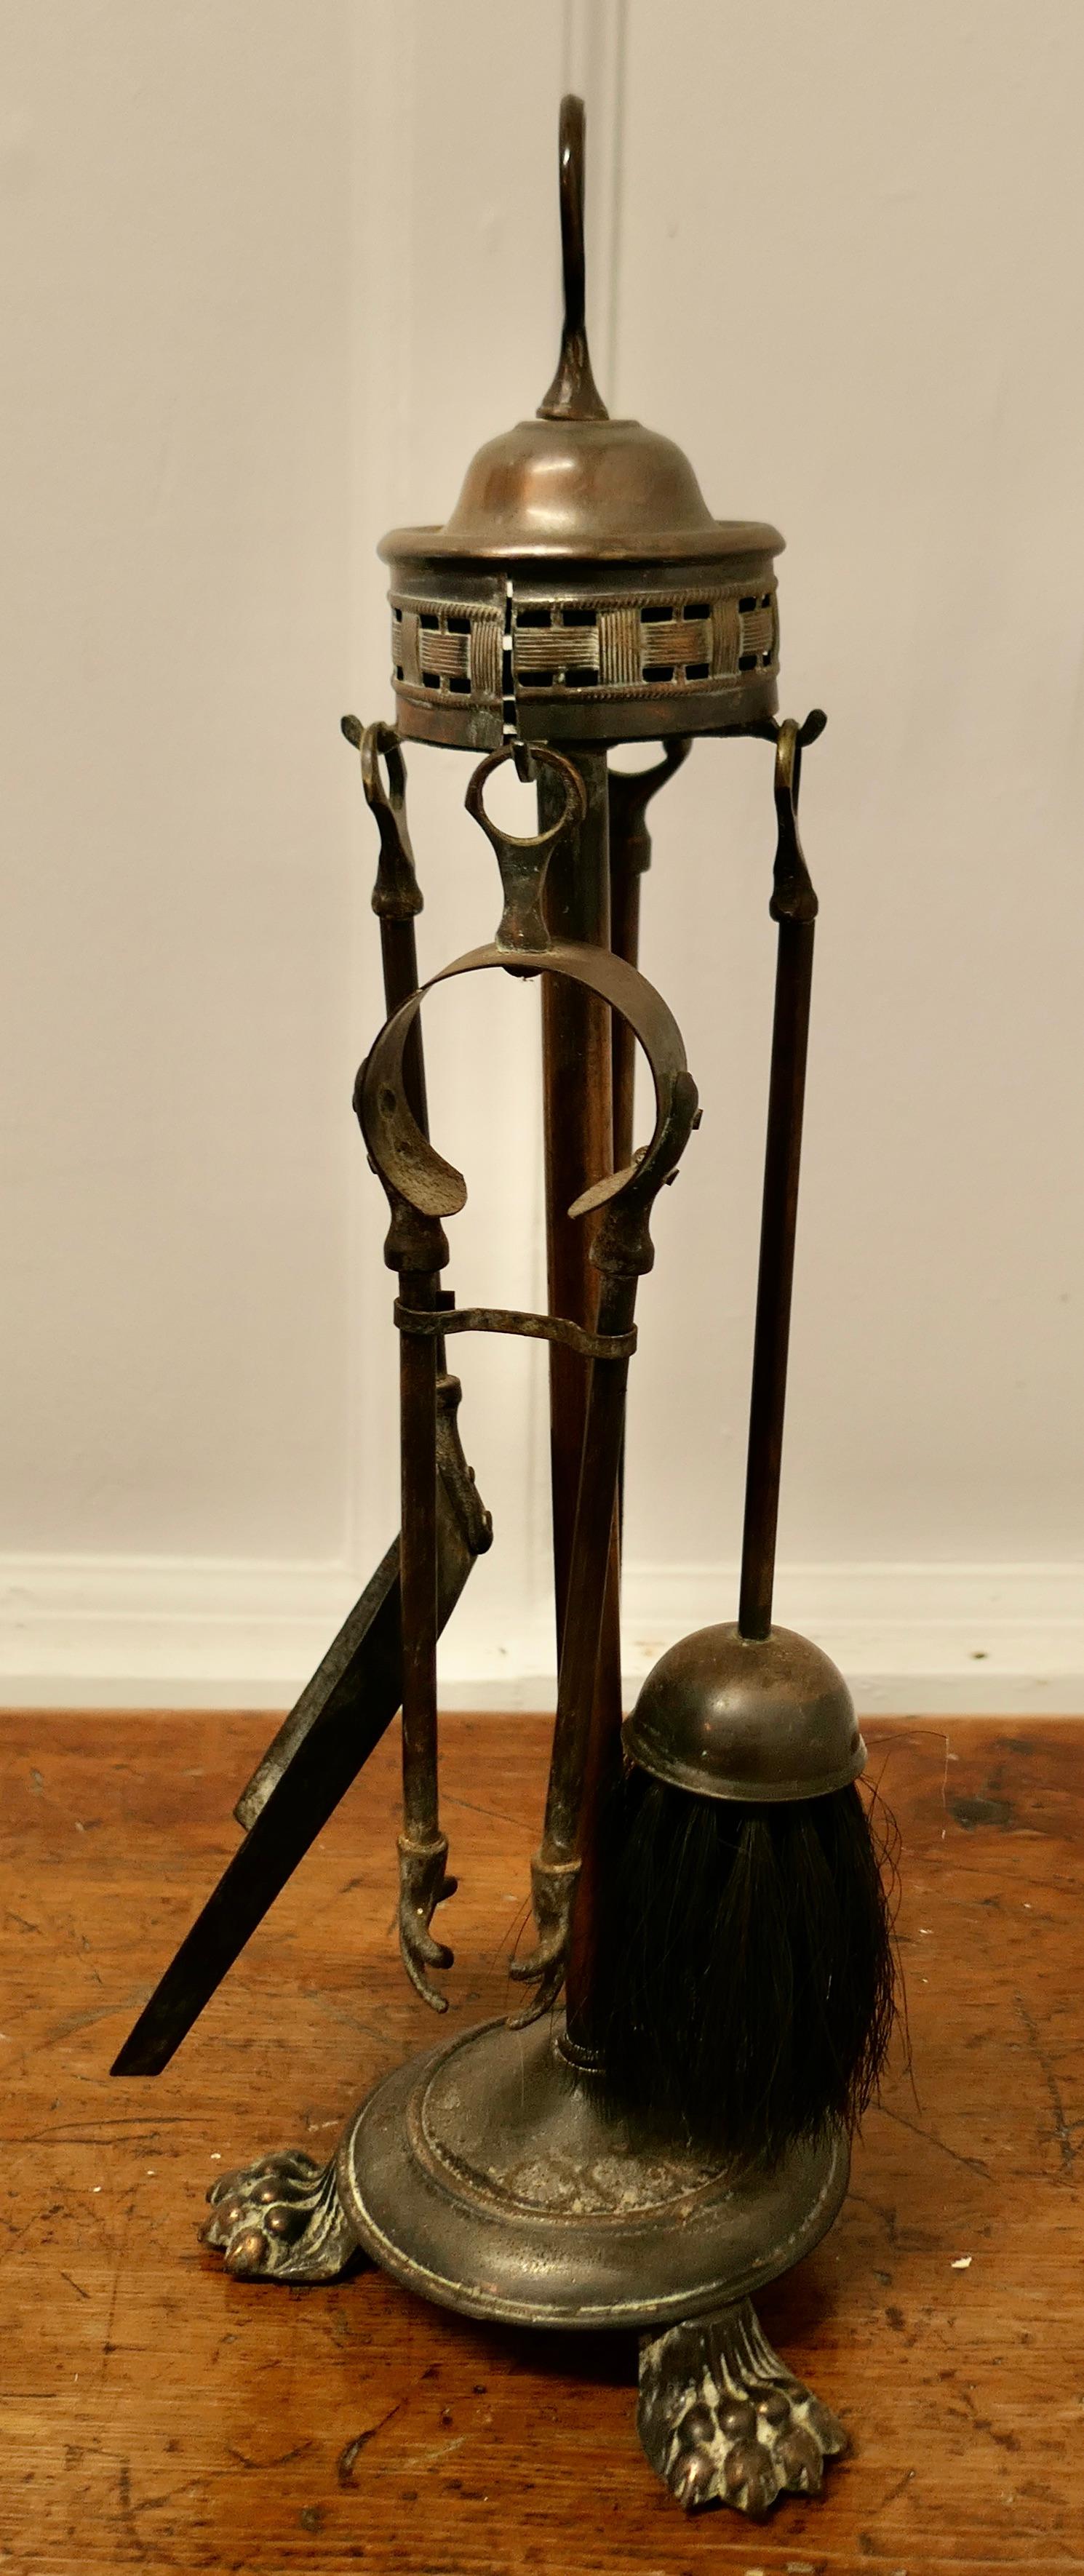 Attractive Brass Fireside Companion Set, Fireside Tools

This is a oxidised copper and brass set on its own stand, shovel, tongs, brush and poker  
The stand 21” tall and 7” in diameter
TSW148
